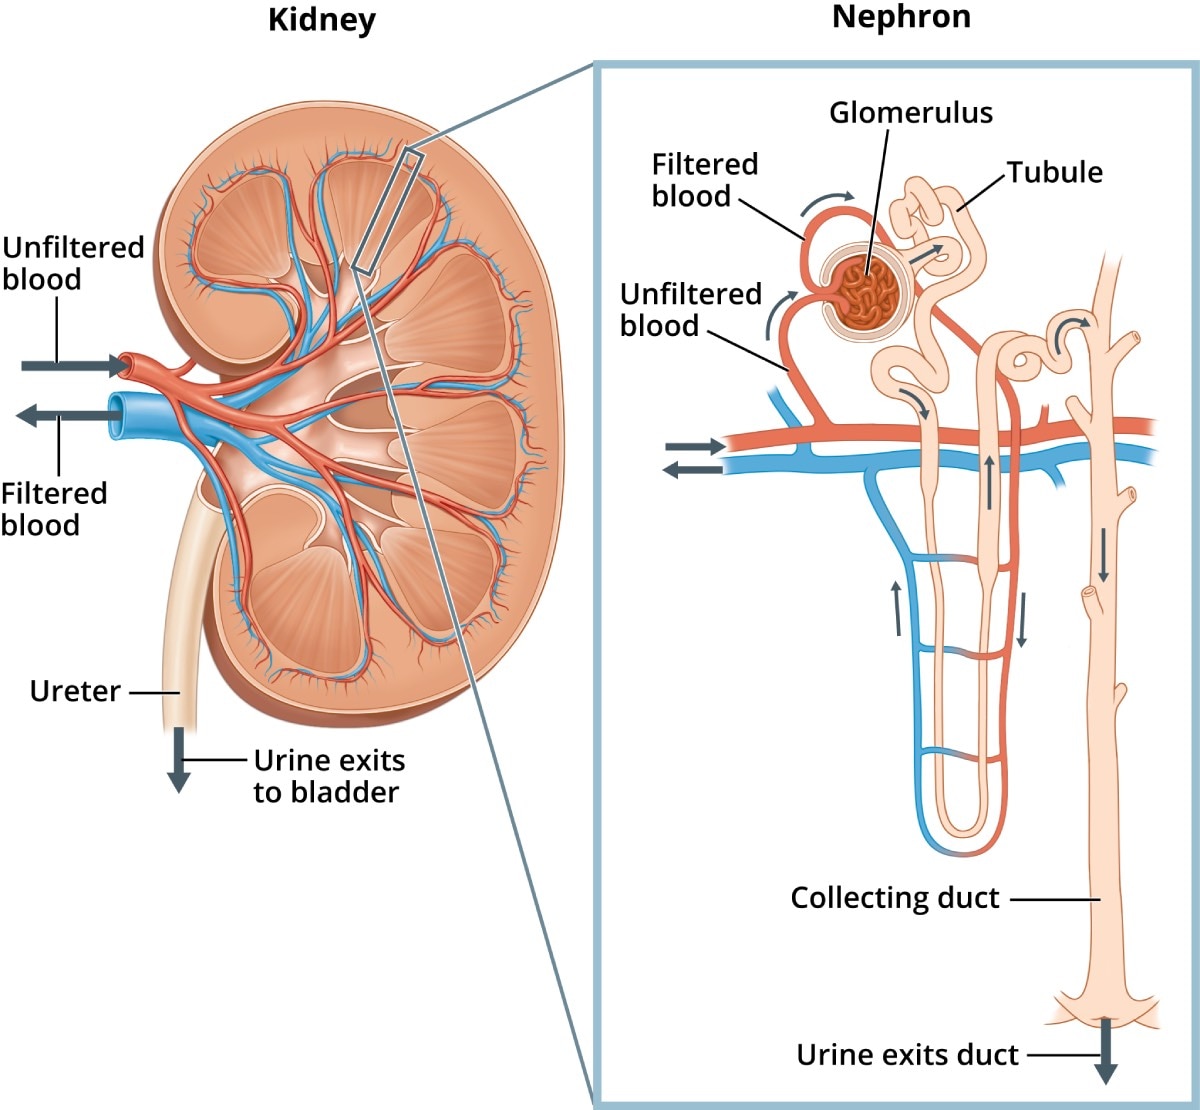 Two illustrations. A human kidney, with arrows showing where unfiltered blood enters the kidney and filtered blood leaves the kidney. Wastes and extra water leave the kidney through the ureter to the bladder as urine. An inset image shows a microscopic view of a nephron, one of the tiny units in the kidney that filters the blood. Labels point to the glomerulus, tubule, and the duct that collects the extra waste and water that leave the body as urine.